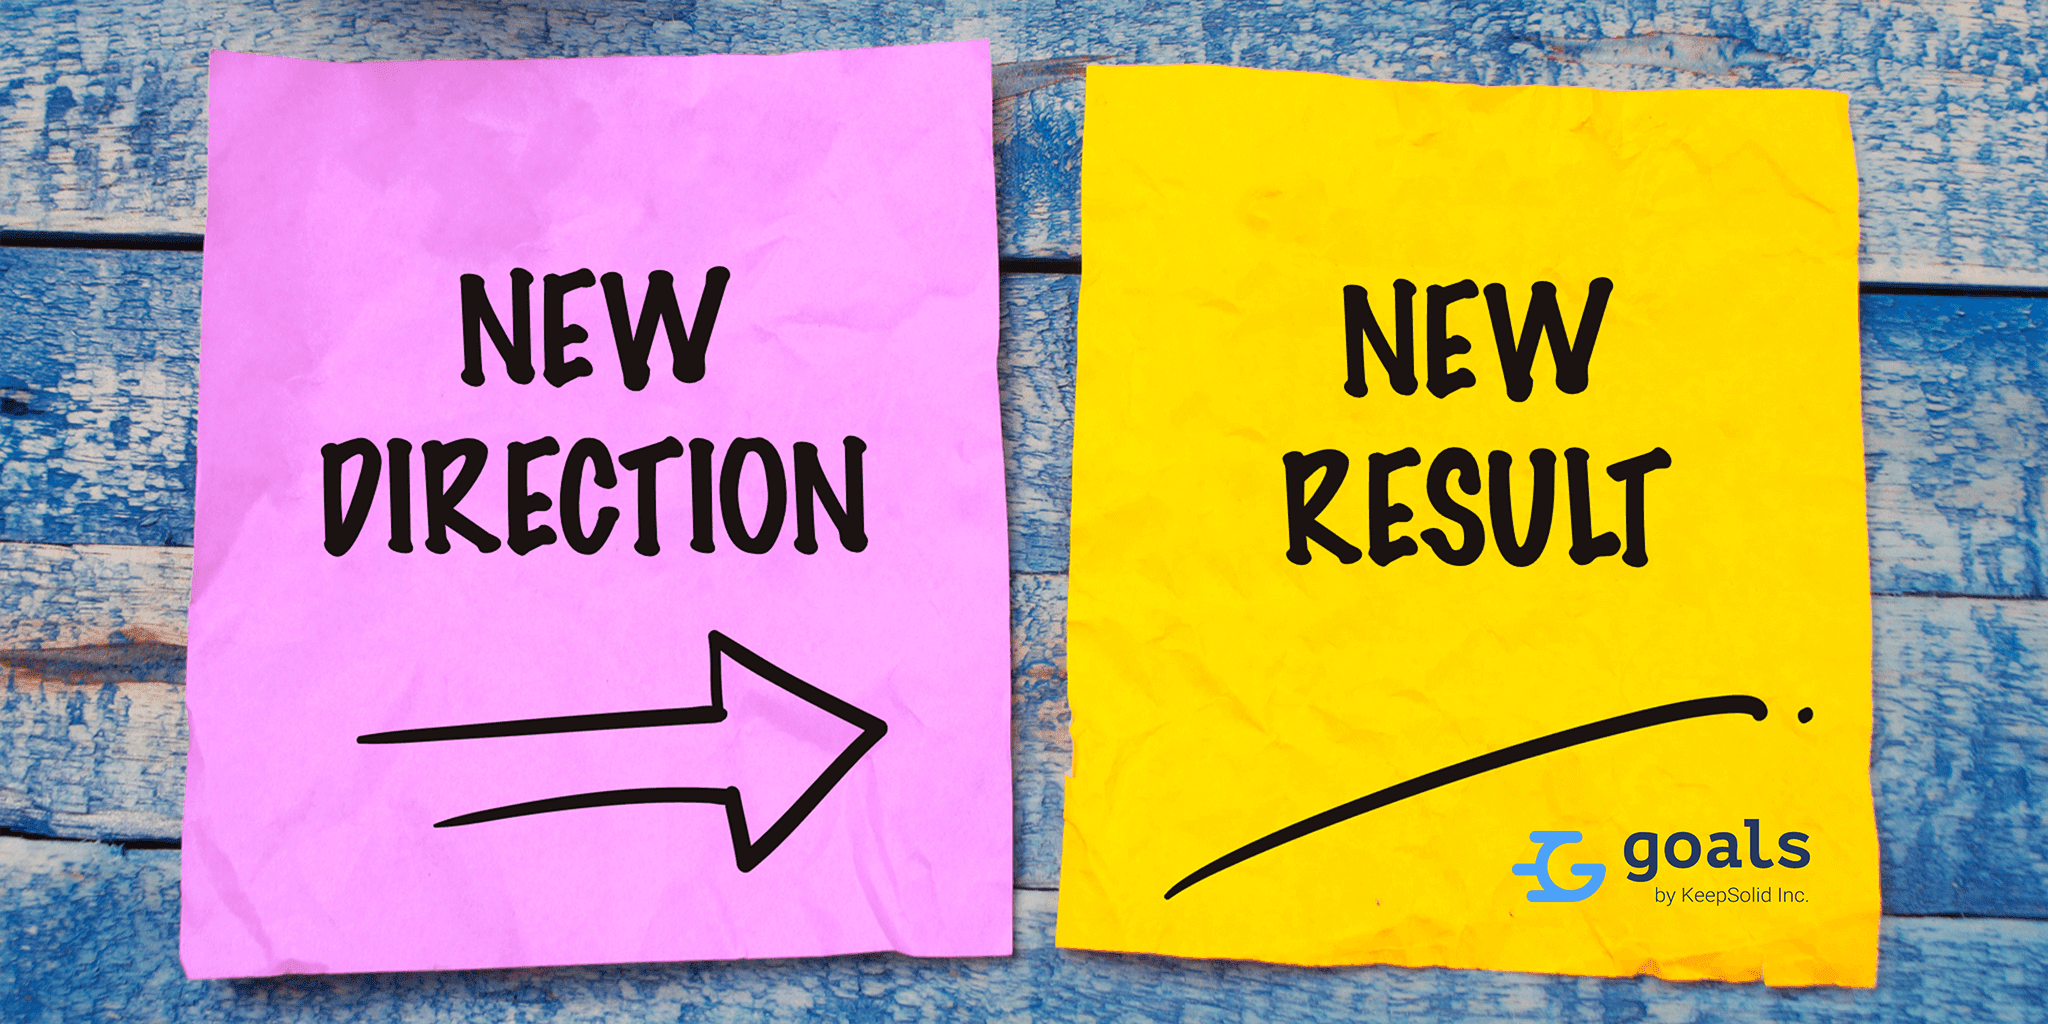 New direction gives New Result. Manage changes effectively and make your business succeed